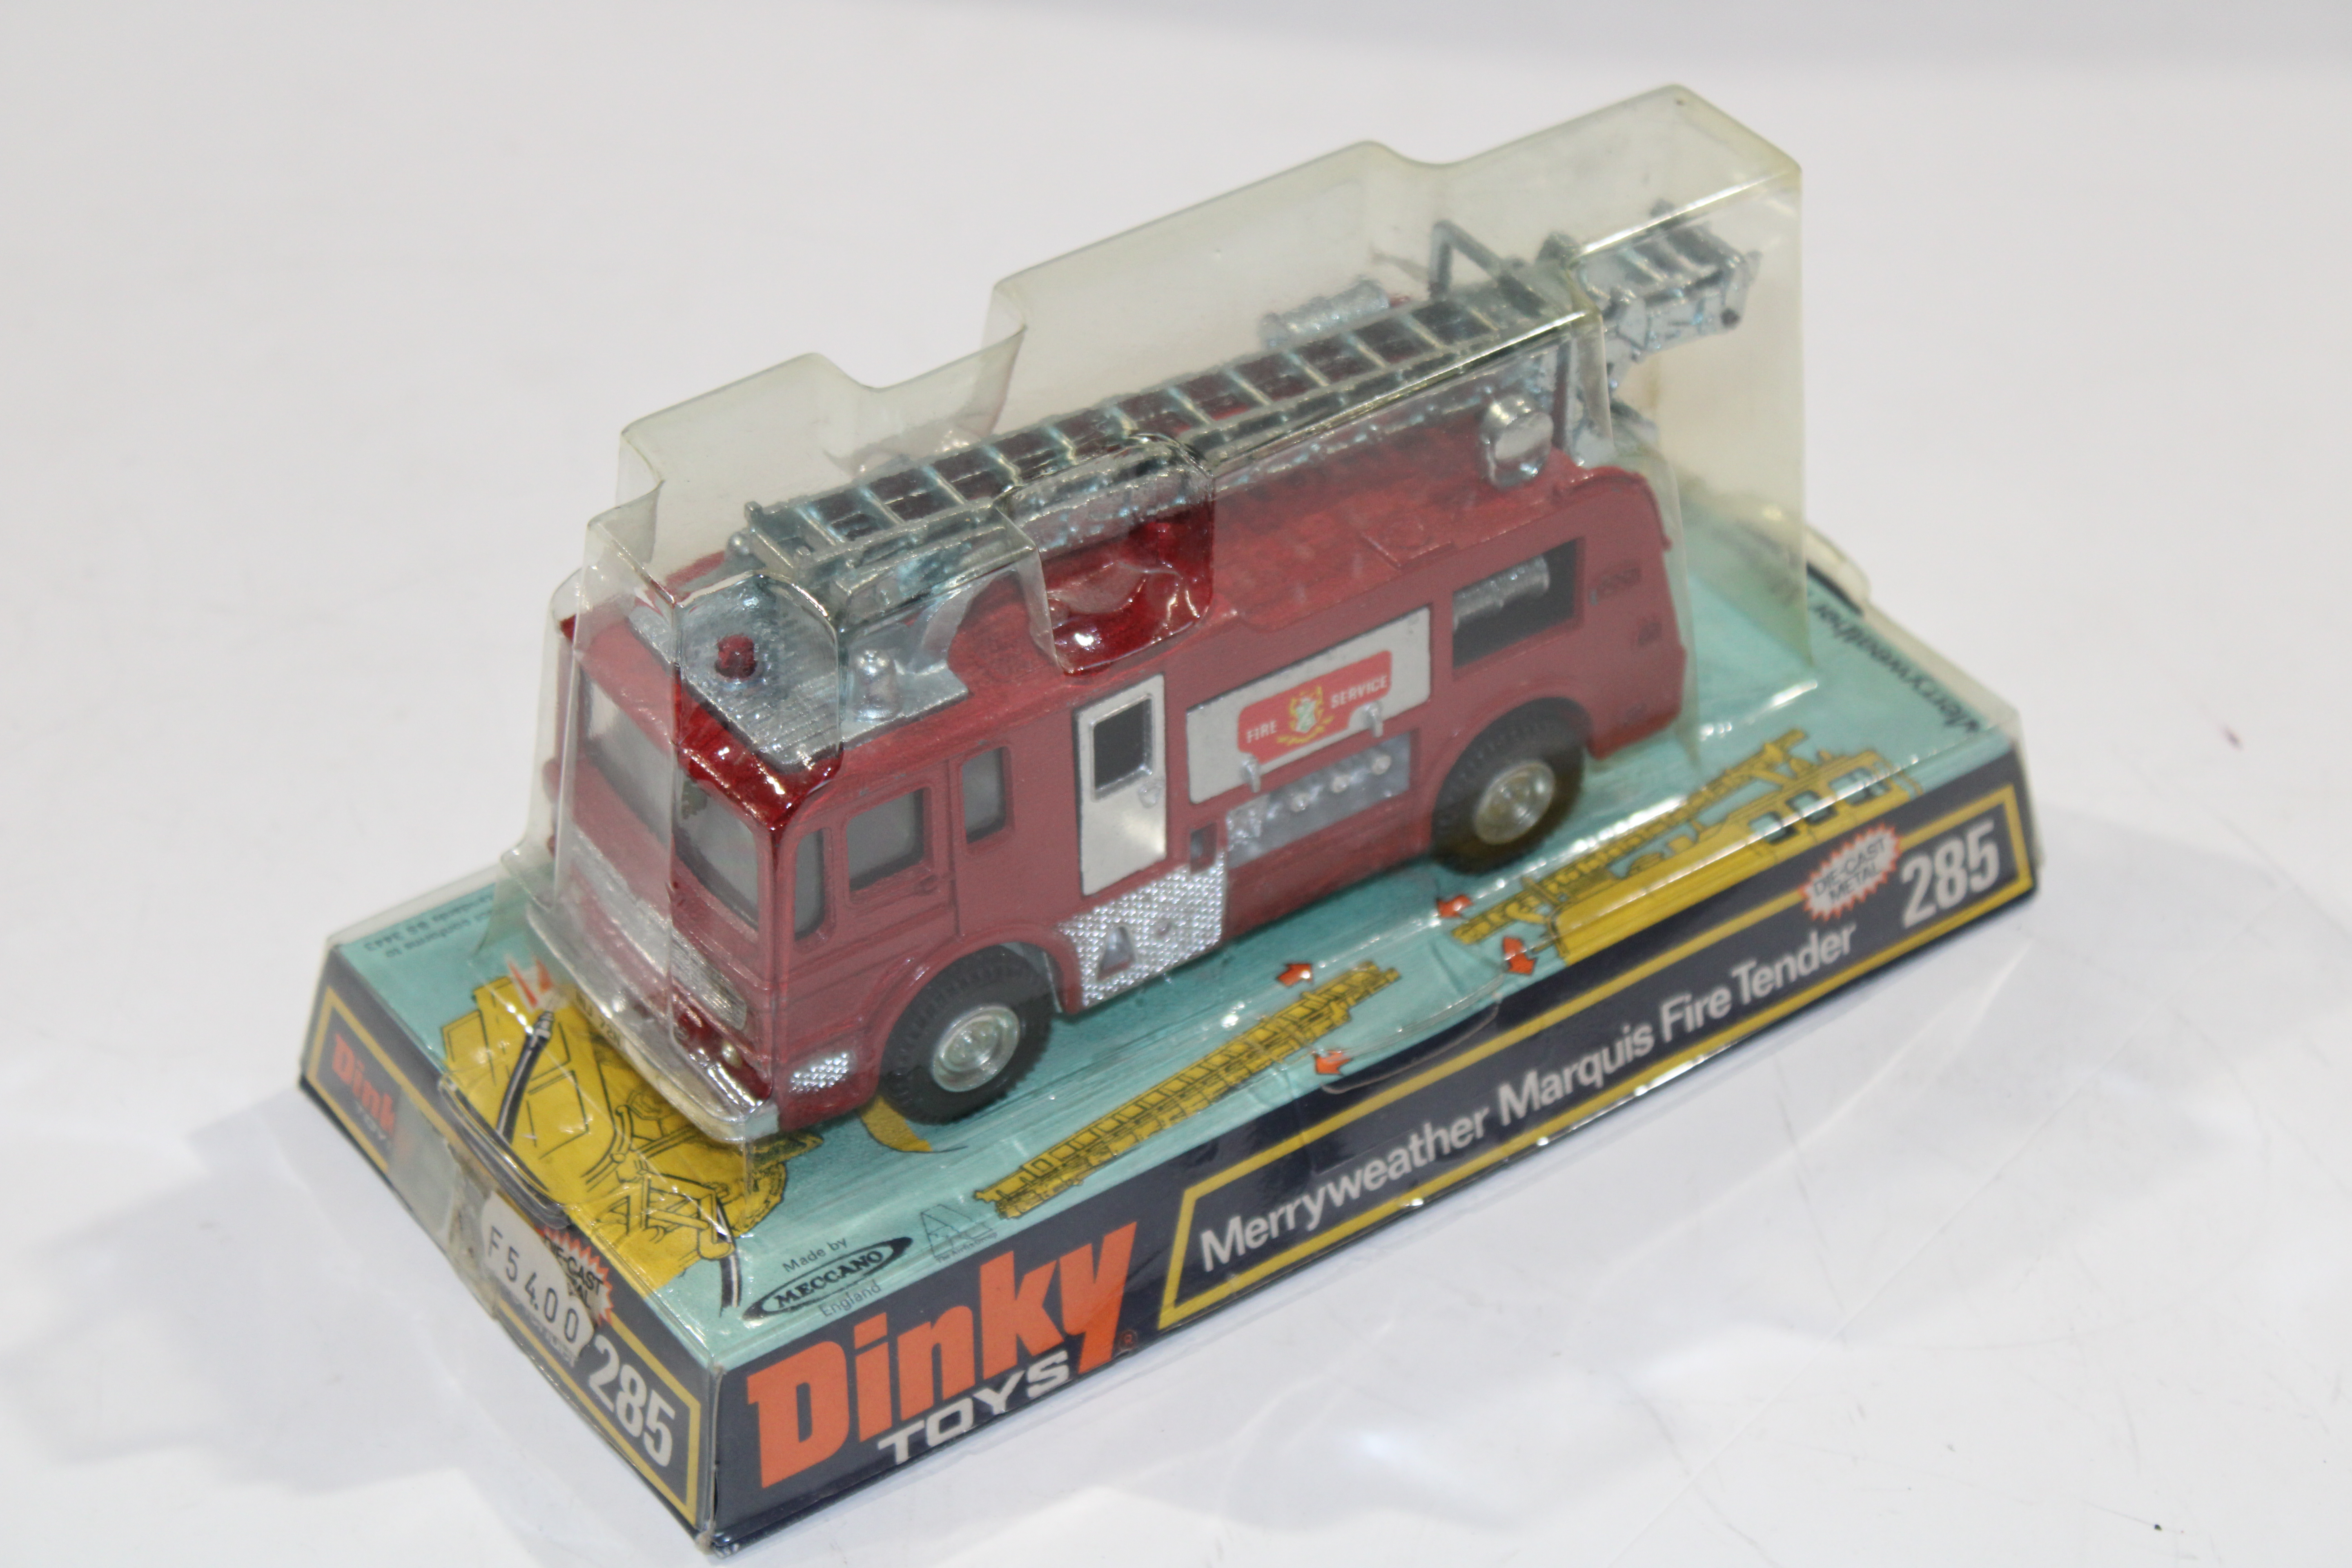 MERRYWEATHER MARQUIS FIRE TENDER 1977 DINKY TOYS 1/43°